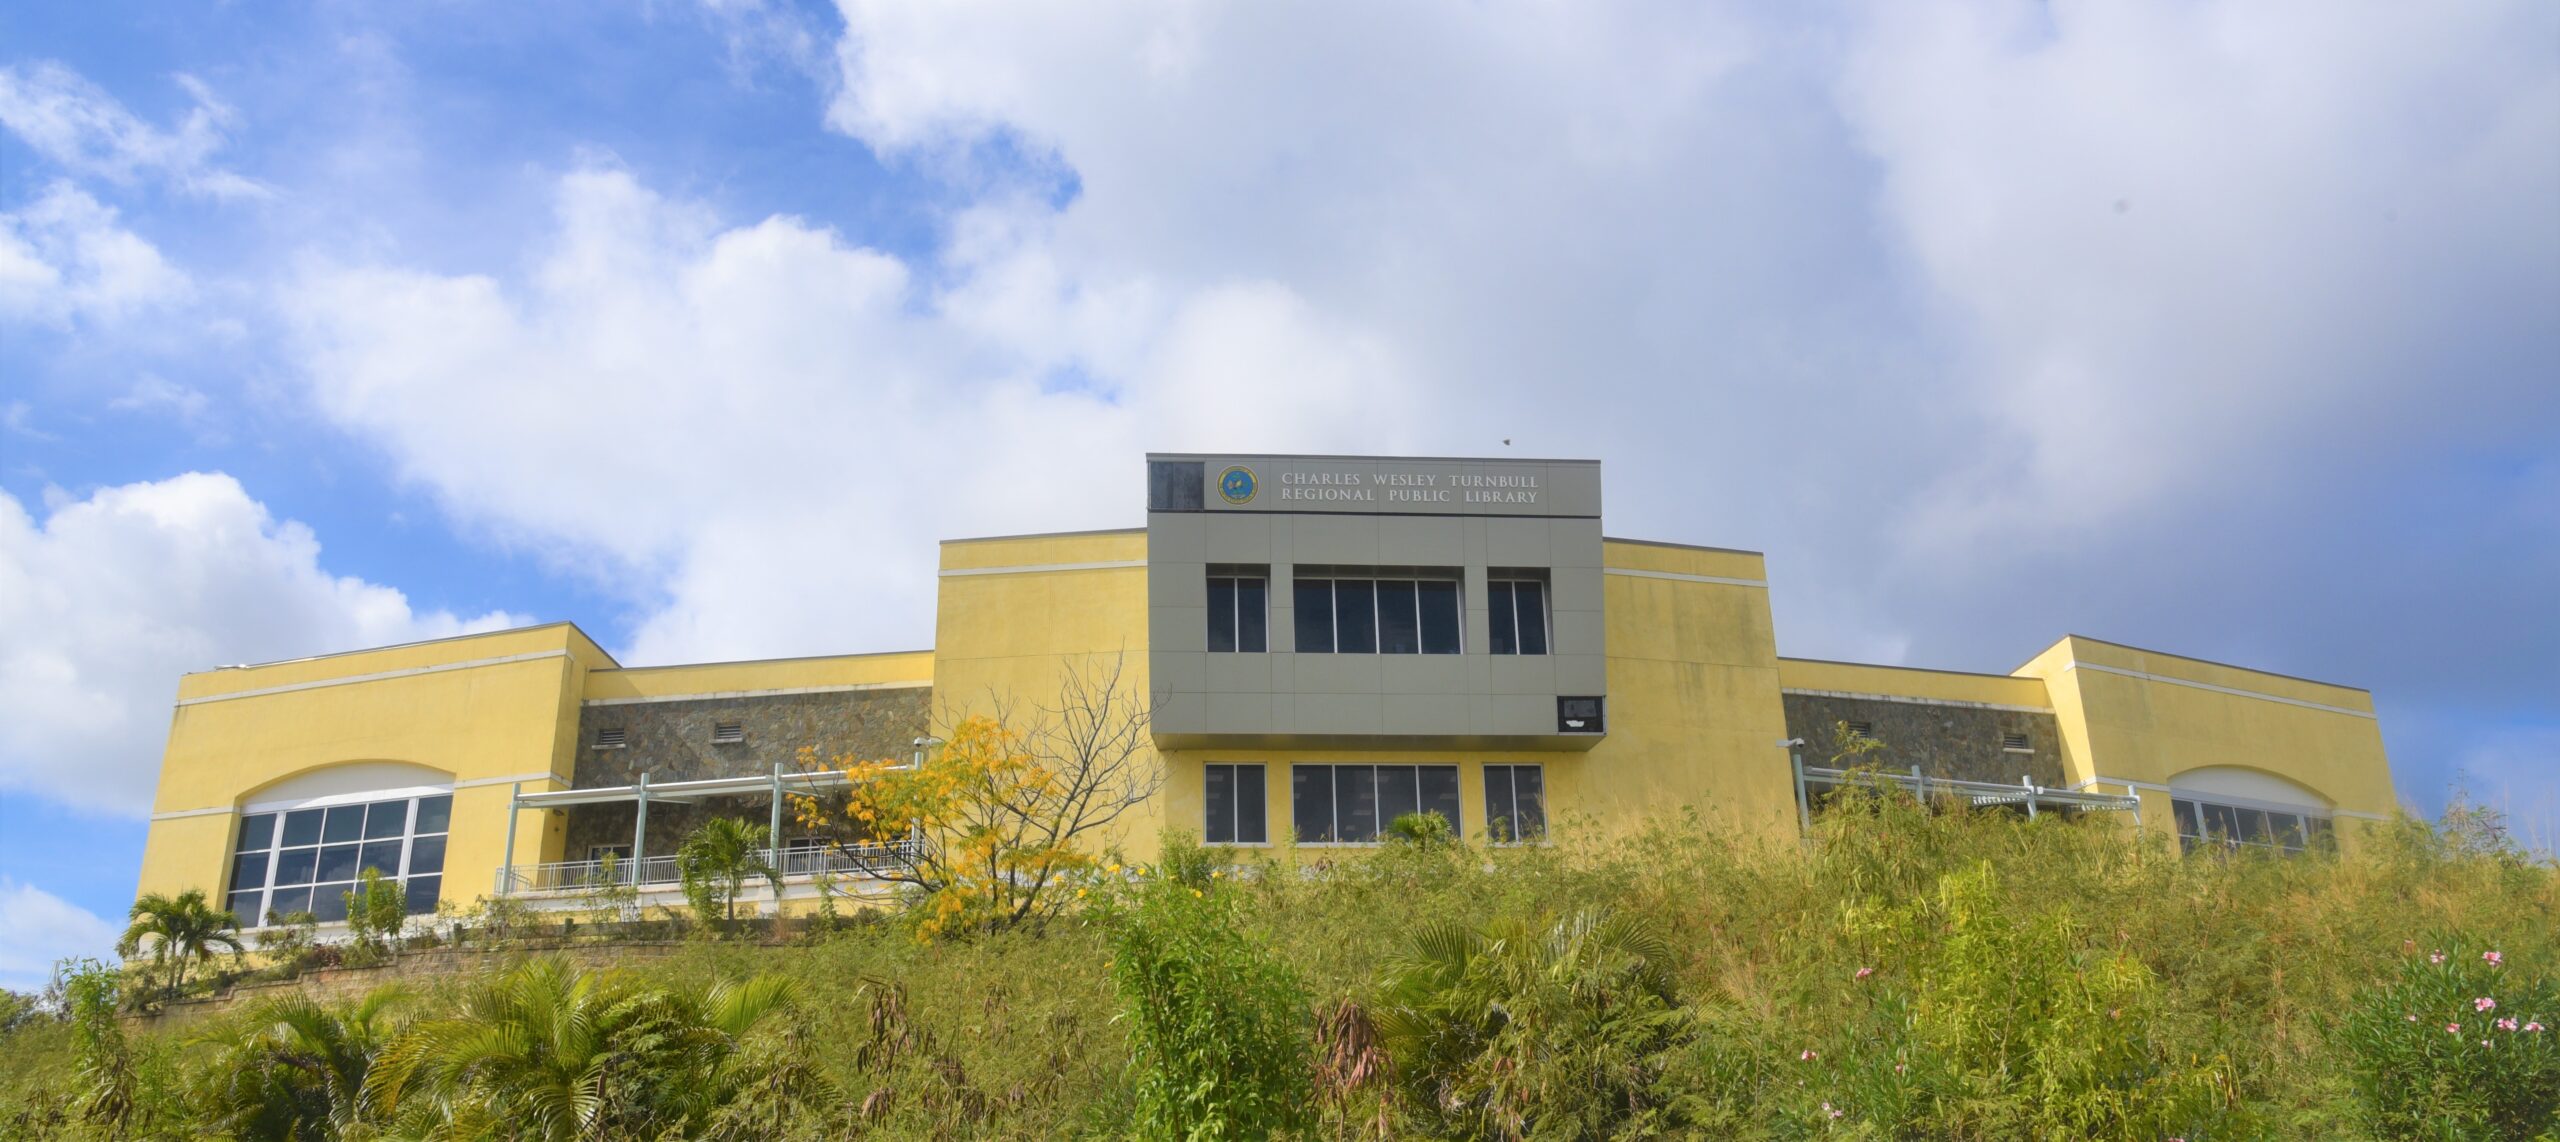 FEMA Gives $2.9 Million For Needed Repairs To Turnbull Library On St. Thomas